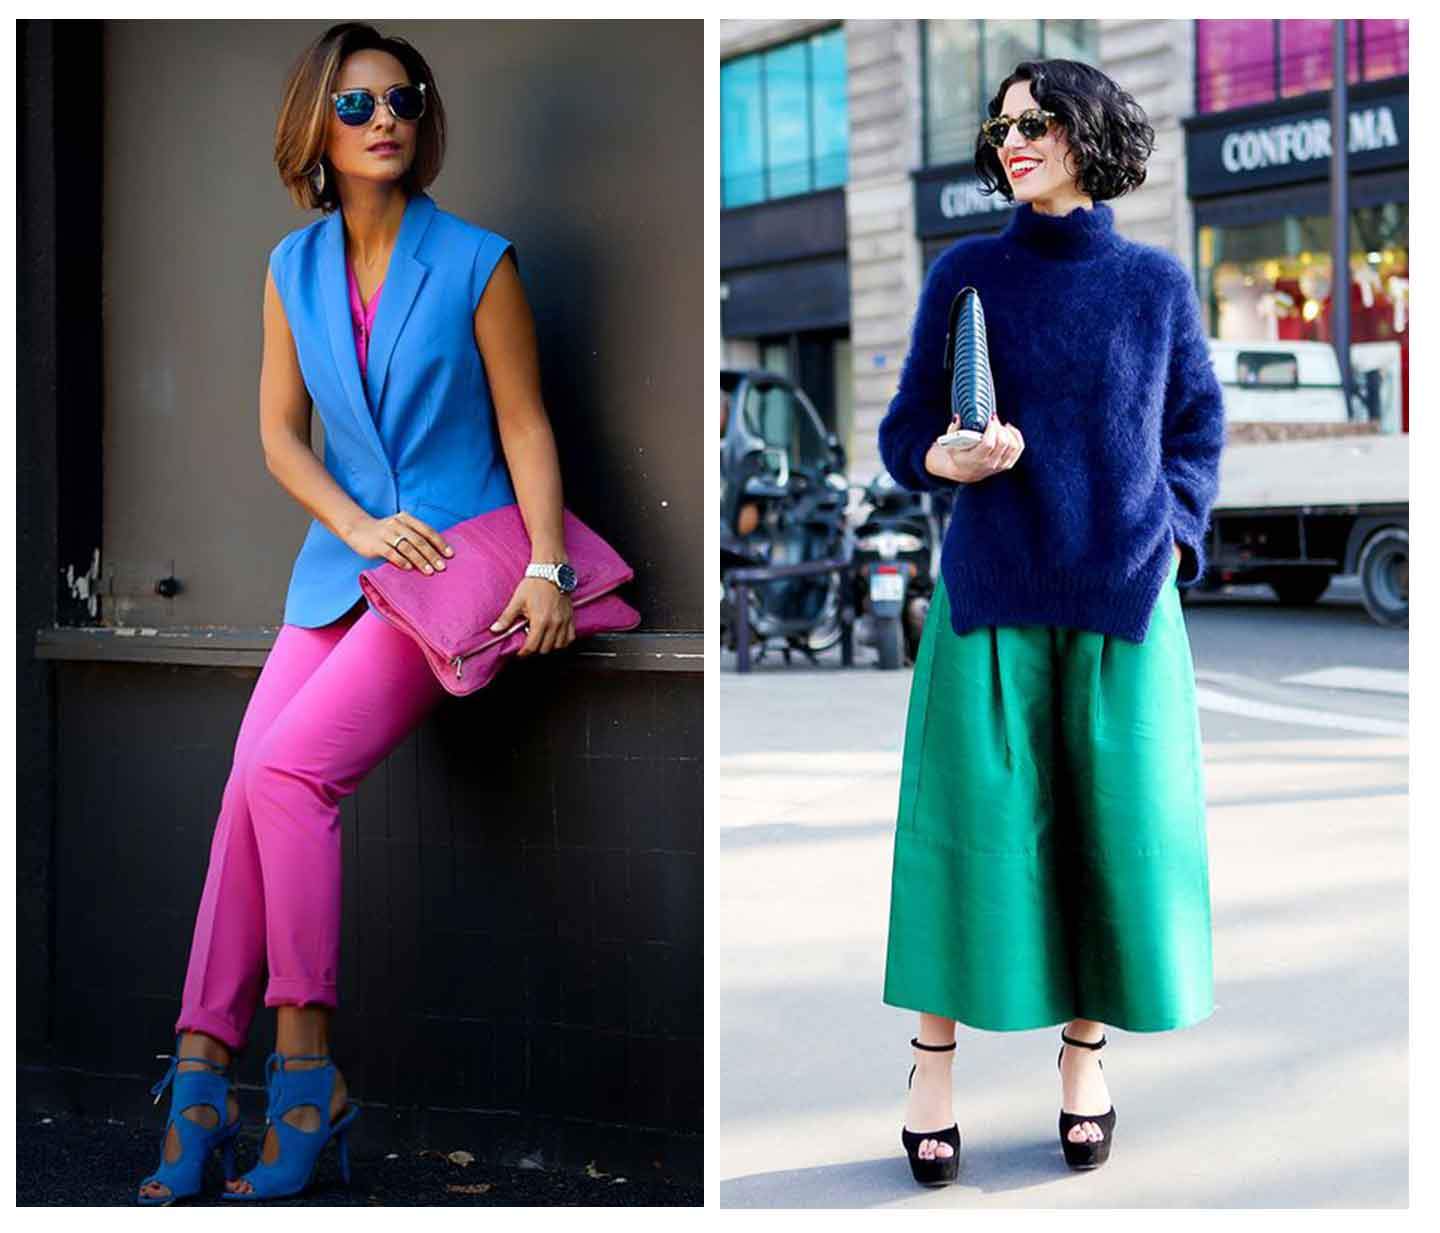 one-woman-leaning-against-a-wall-wearing-a-blue-waistcoat-with-pink-trousers-and-another-woman-wearing-a-blue-jumper-with-a-green-skirt-standing-in-the-street